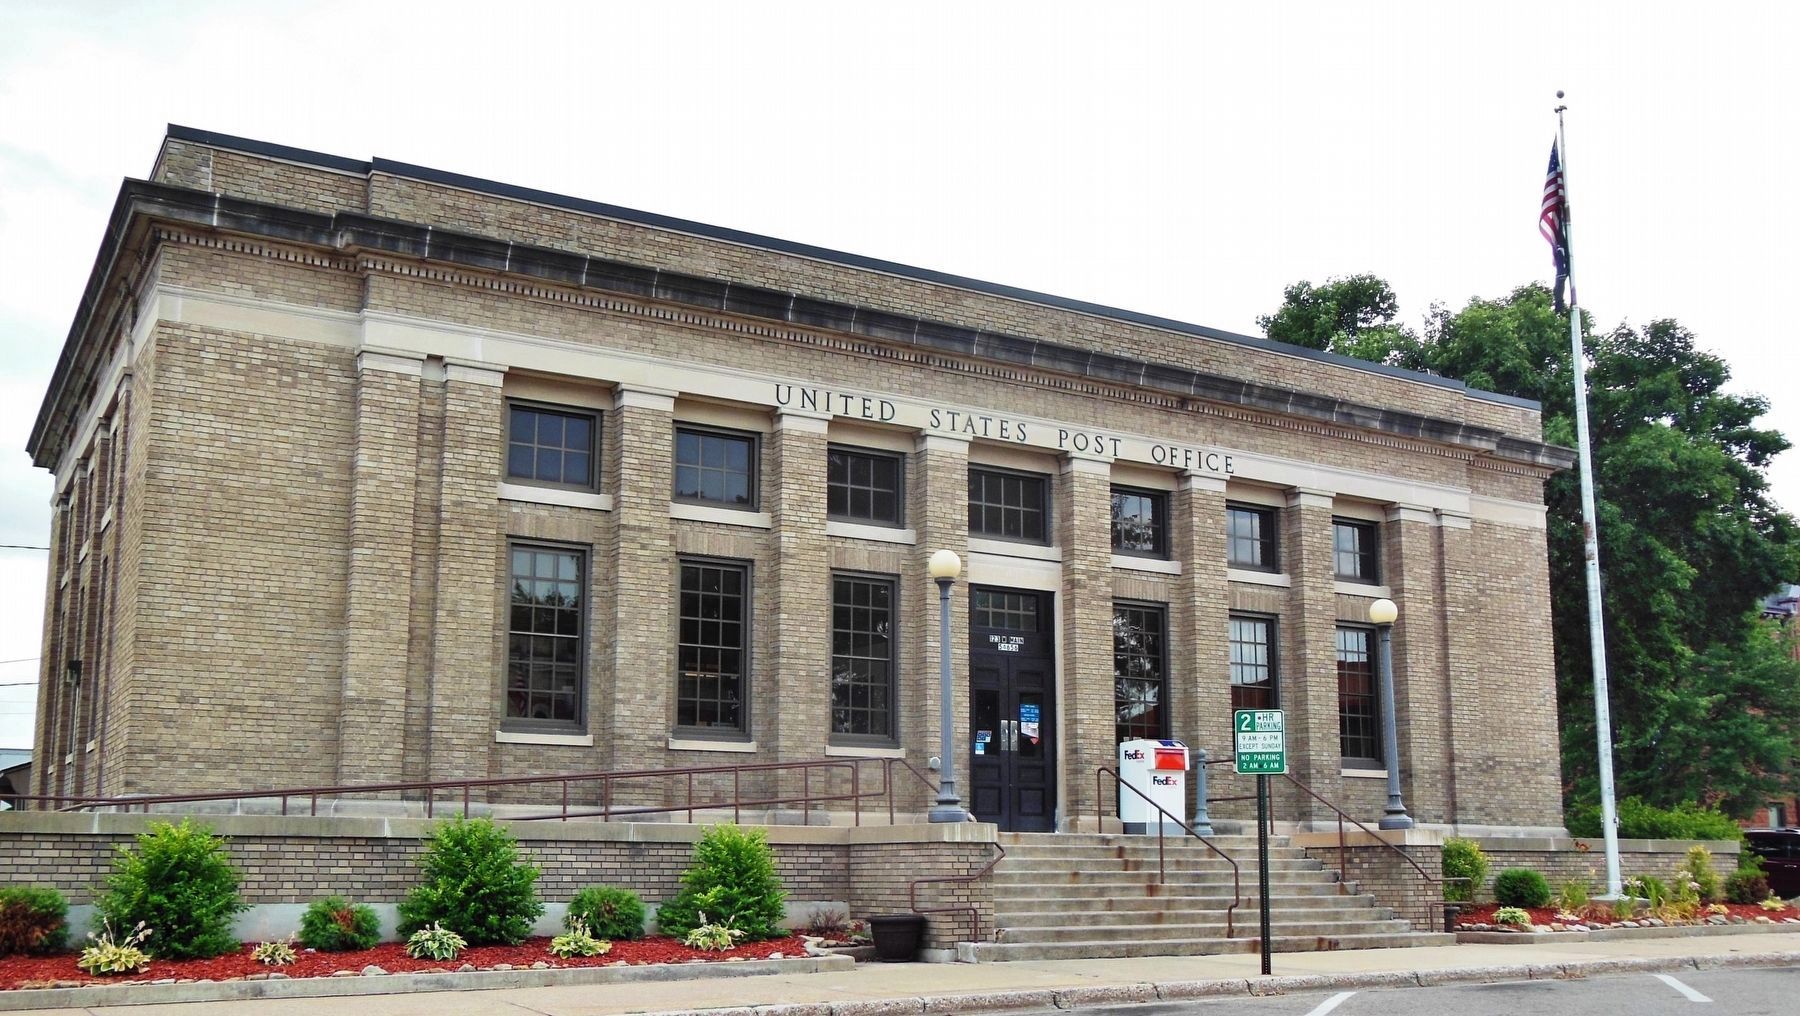 U.S. Post Office, Sparta, Wisconsin image. Click for full size.